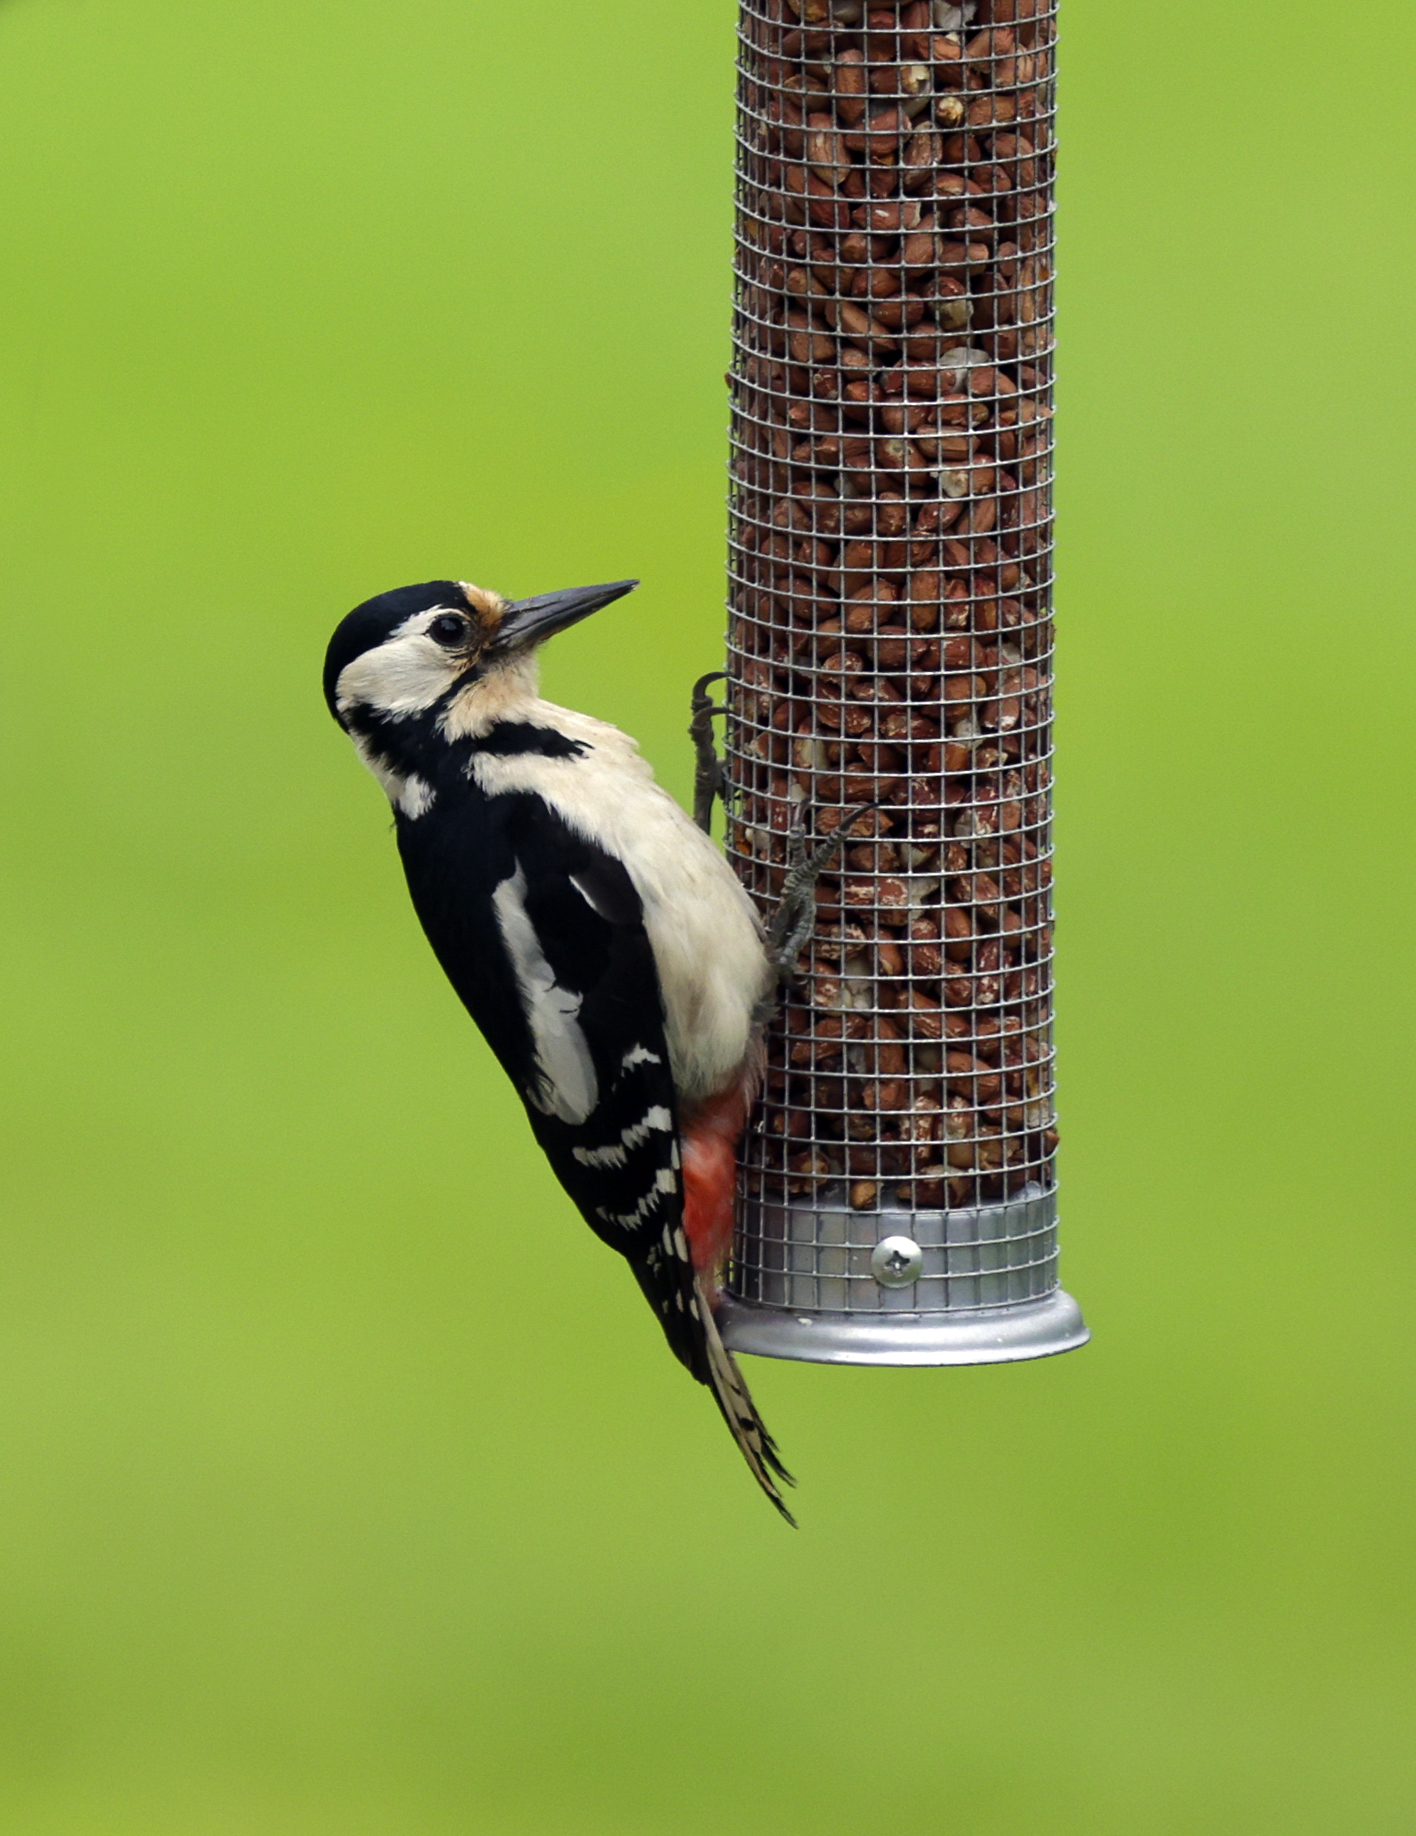 The Great Spotted Woodpecker in Newtownbutler